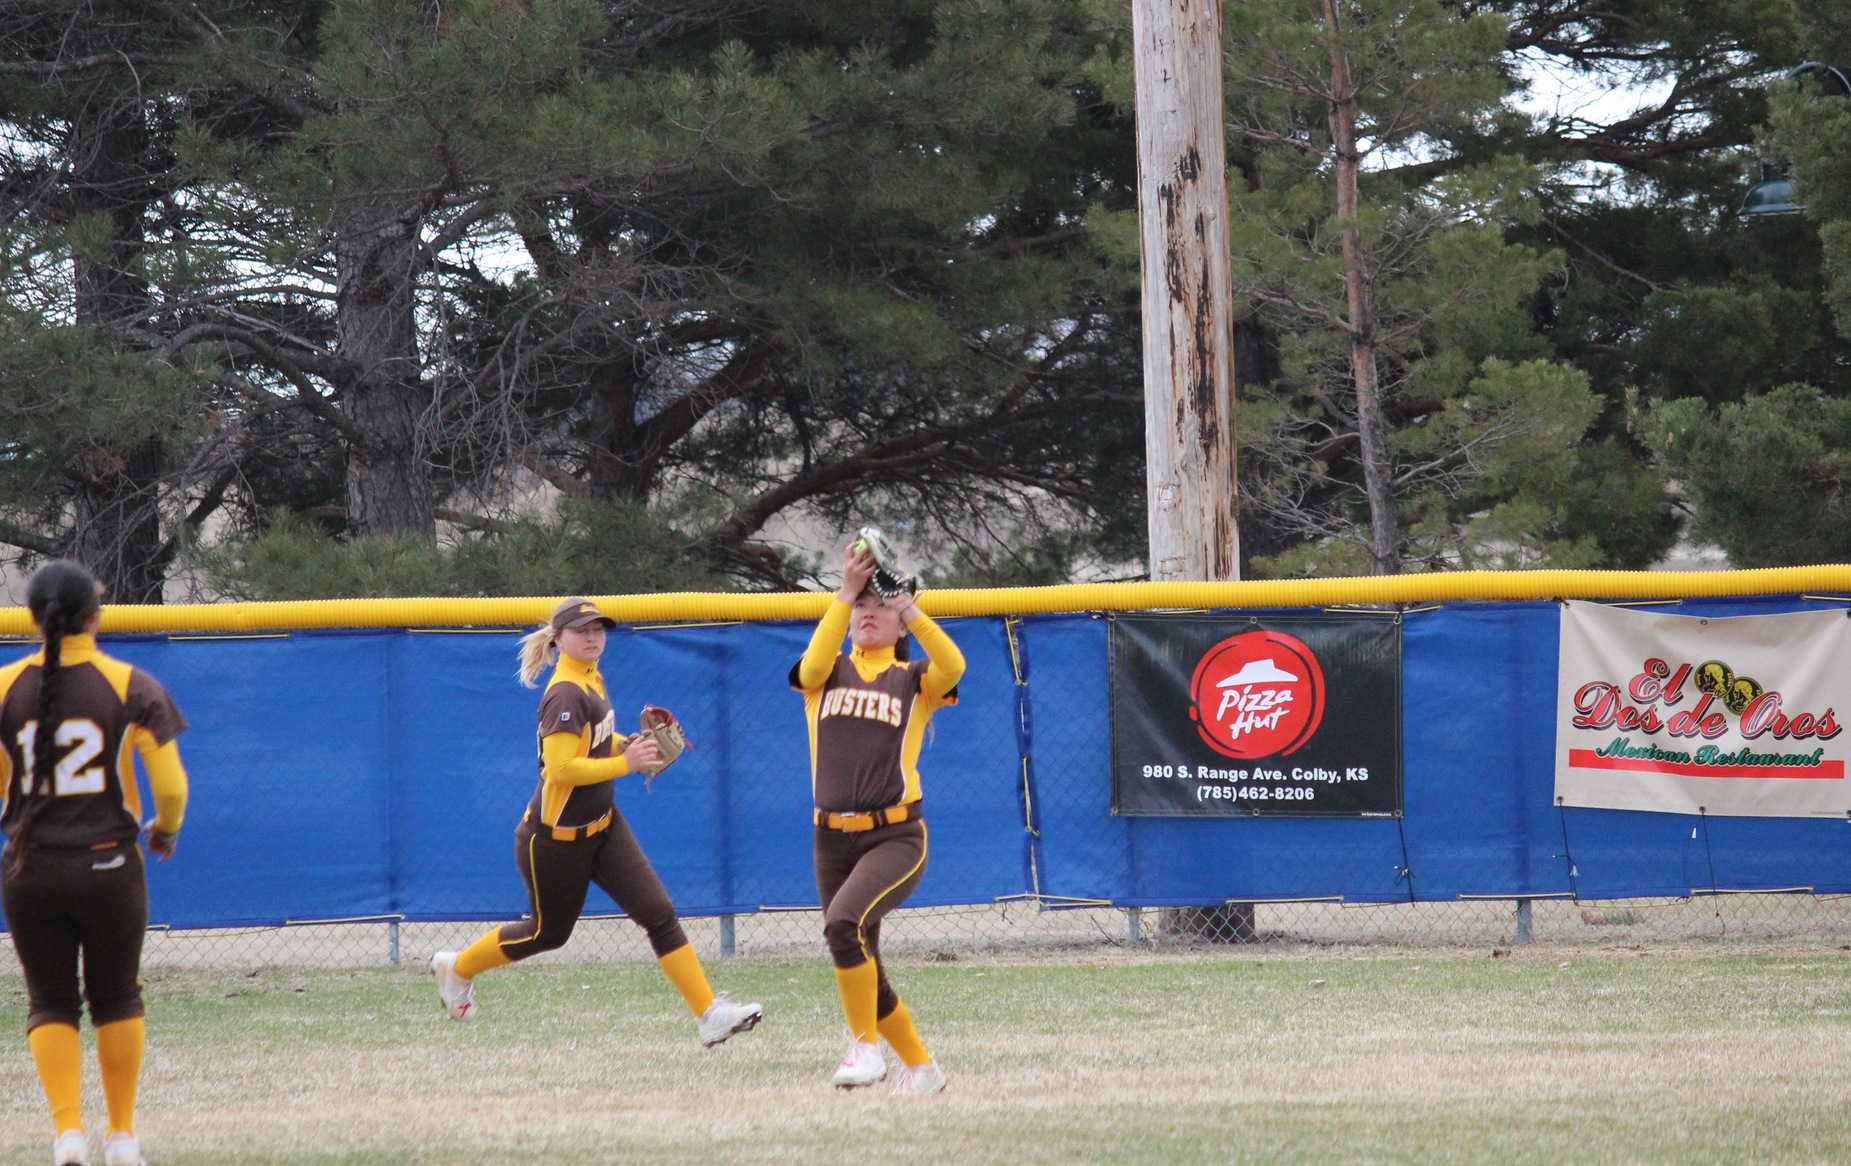 Garden City uses the long ball to down Colby in game two